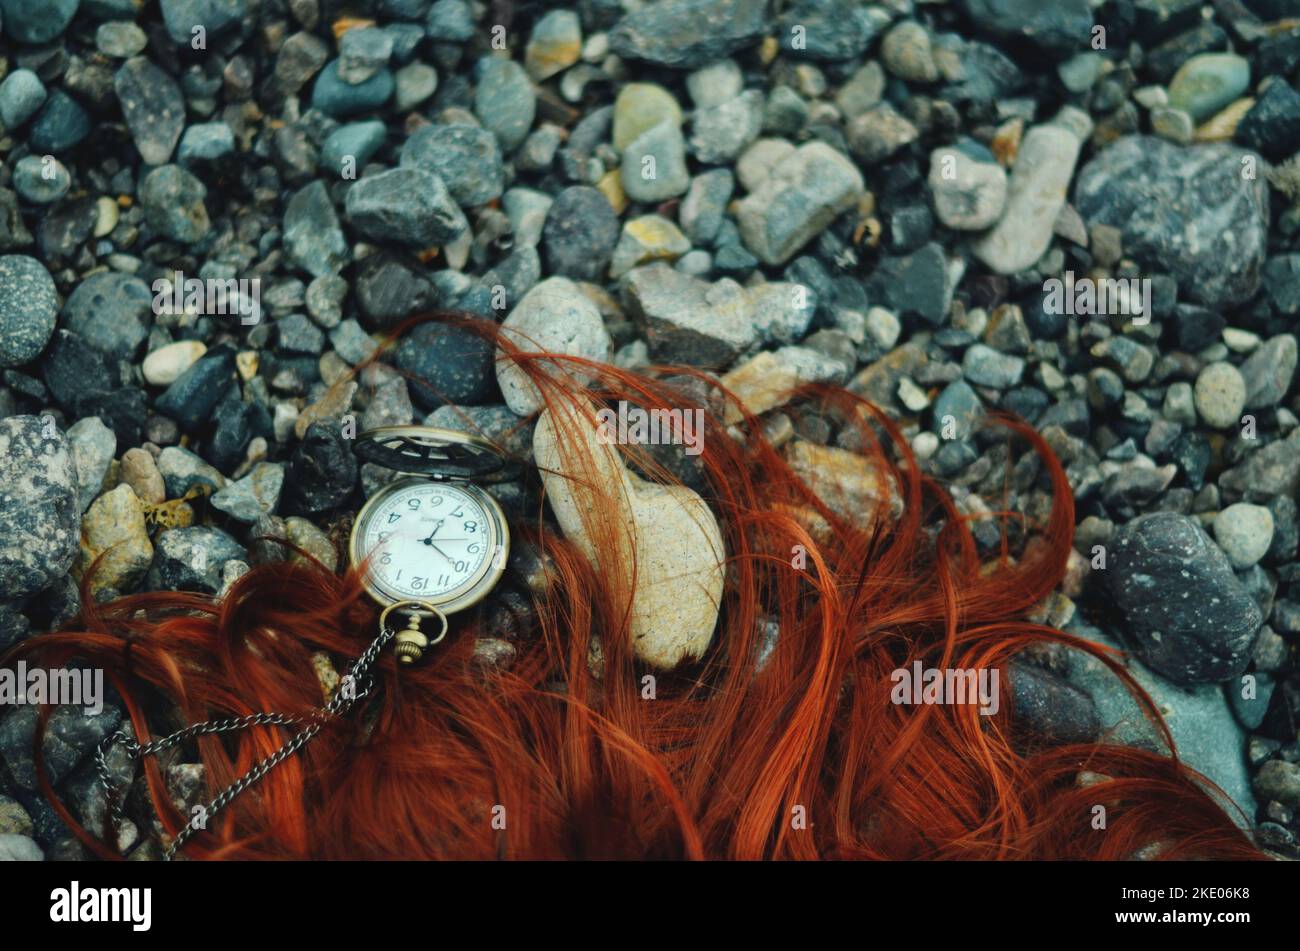 Long red hair and a pocket watch on a rocky beach Stock Photo